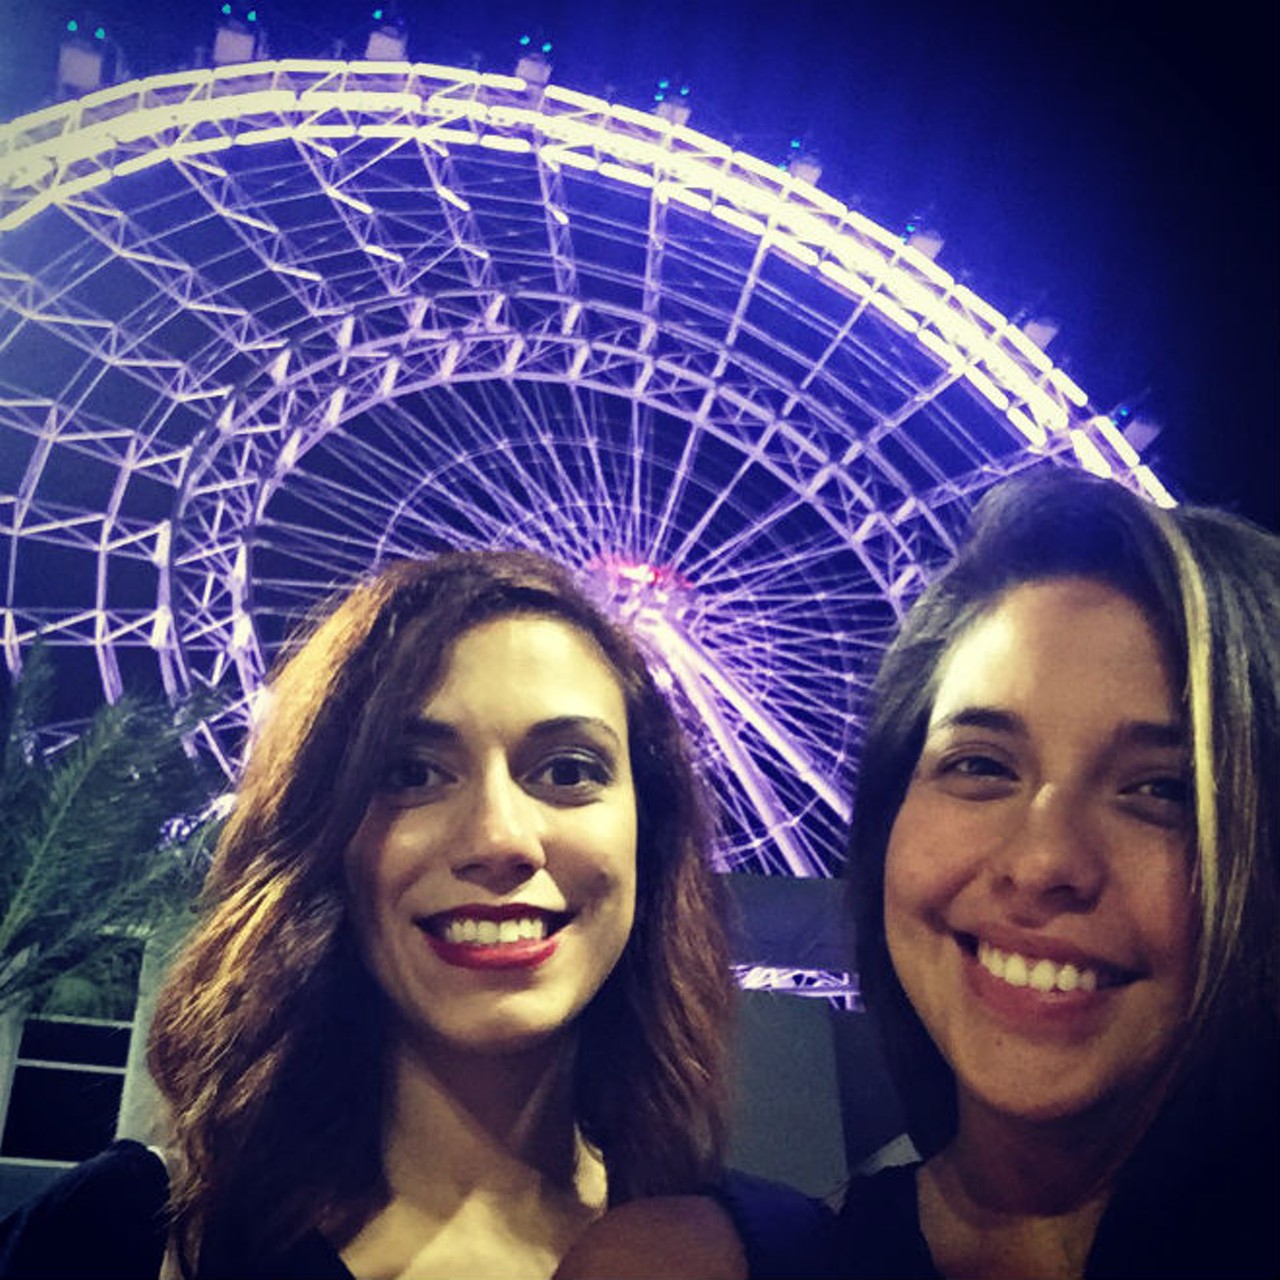 The Orlando Eye has the best photo ops!